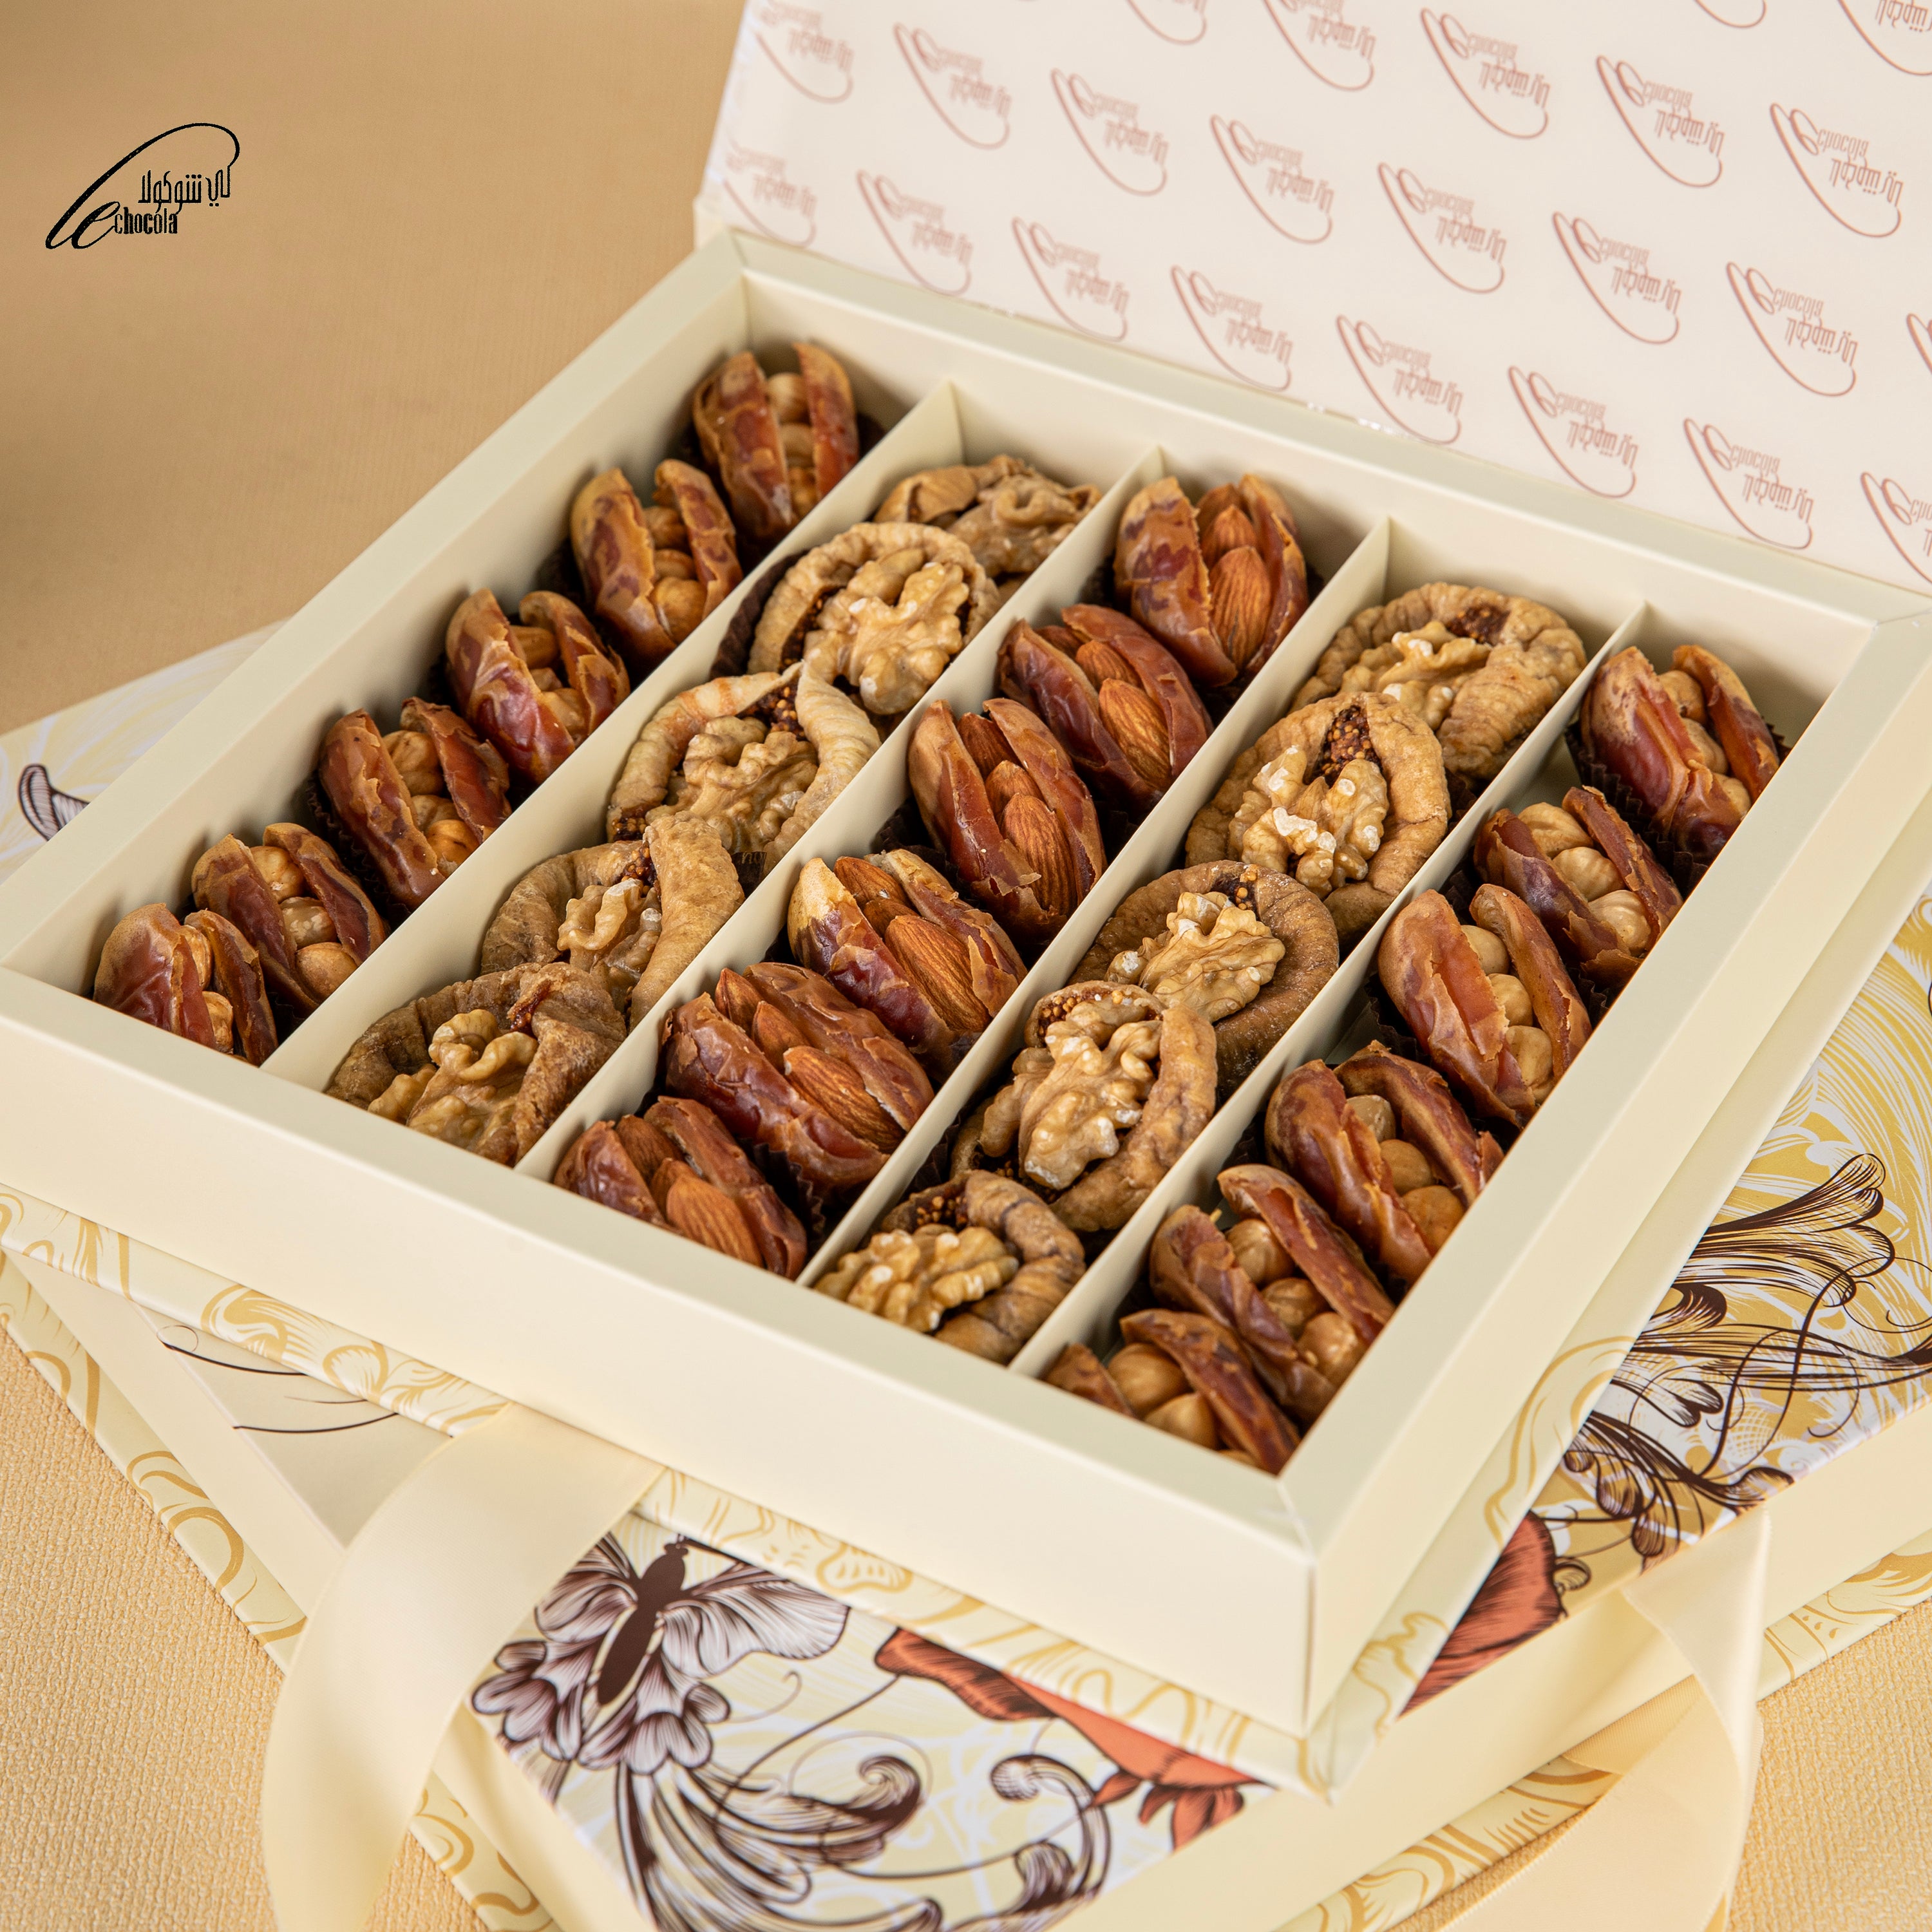 Dates & Figs with nuts boxes